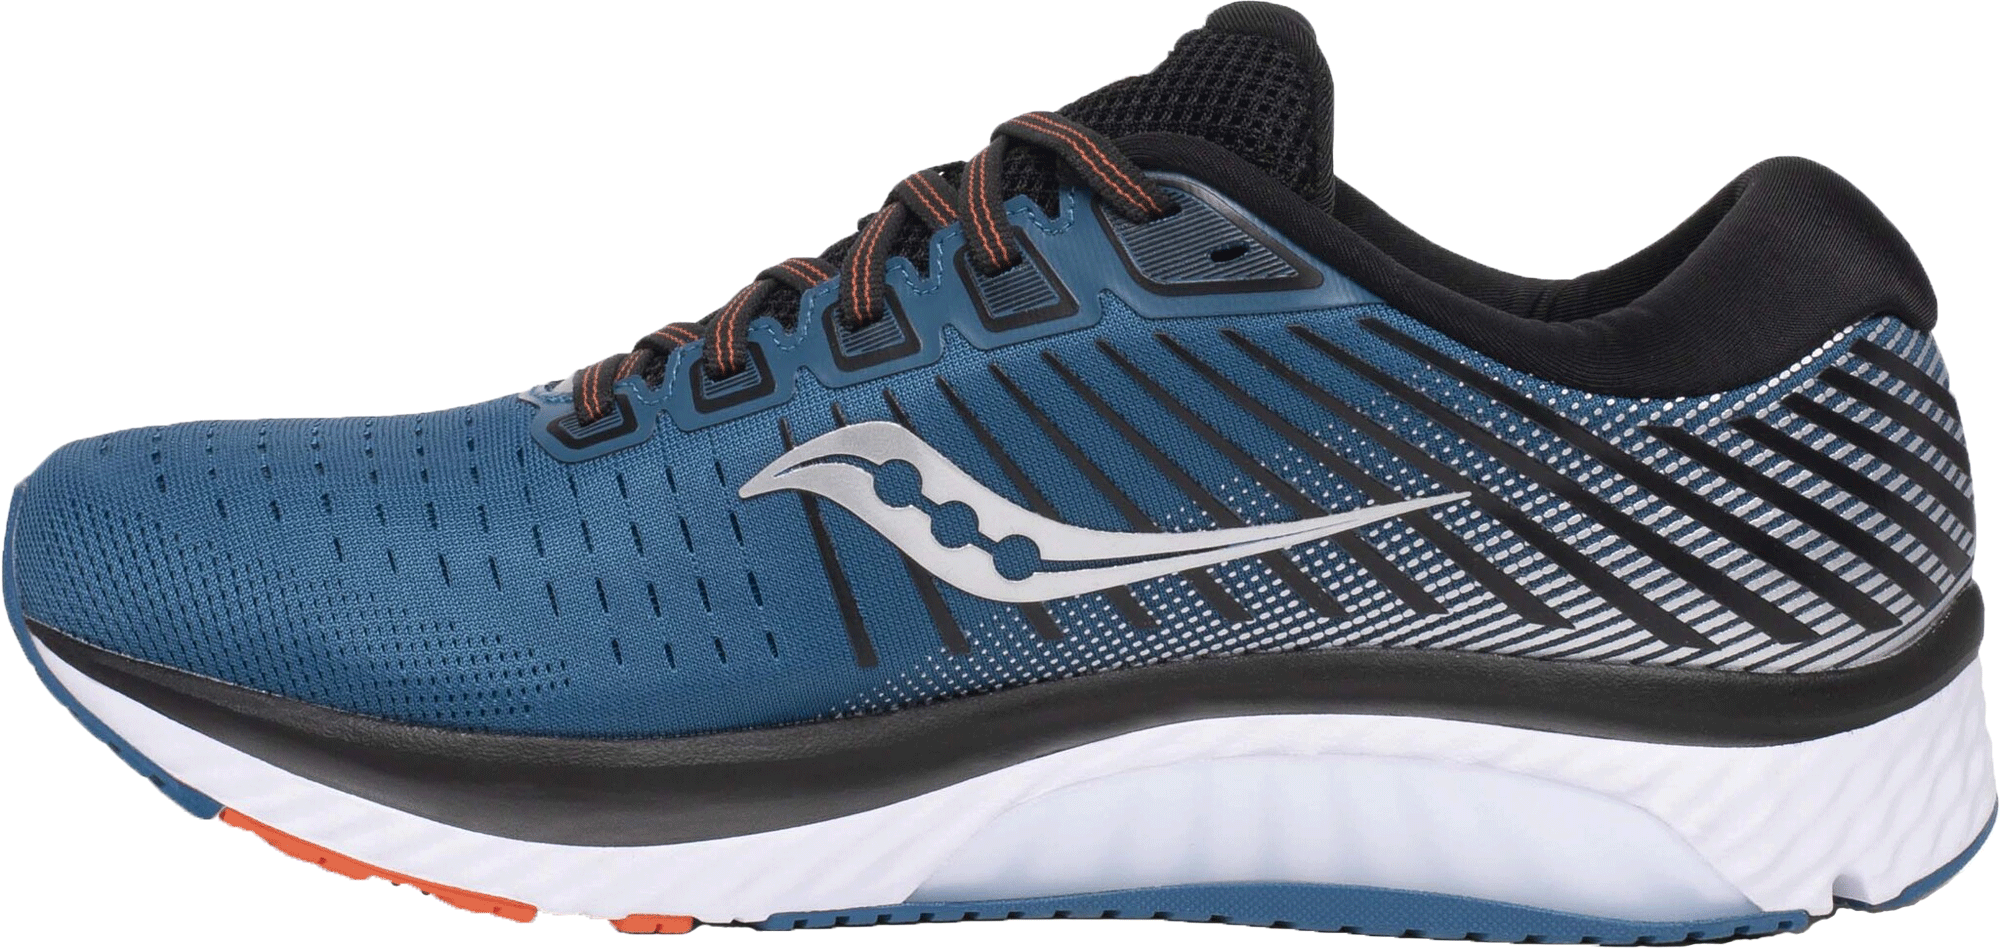 Buy the Saucony Guide 13 and 13 TR Running Shoes Online | 21RUN